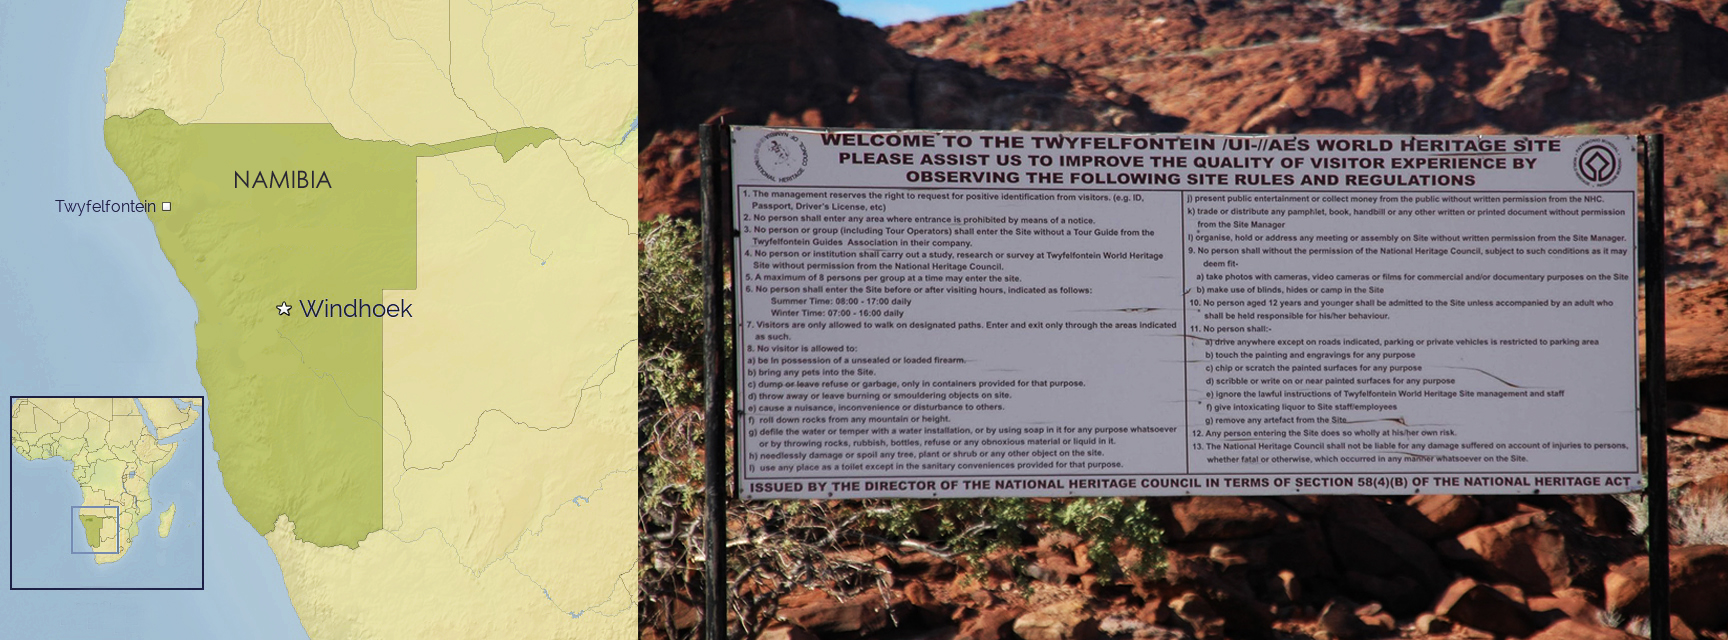 Twyfelfontein in Namibia, Africa, petroglyphs and carvings